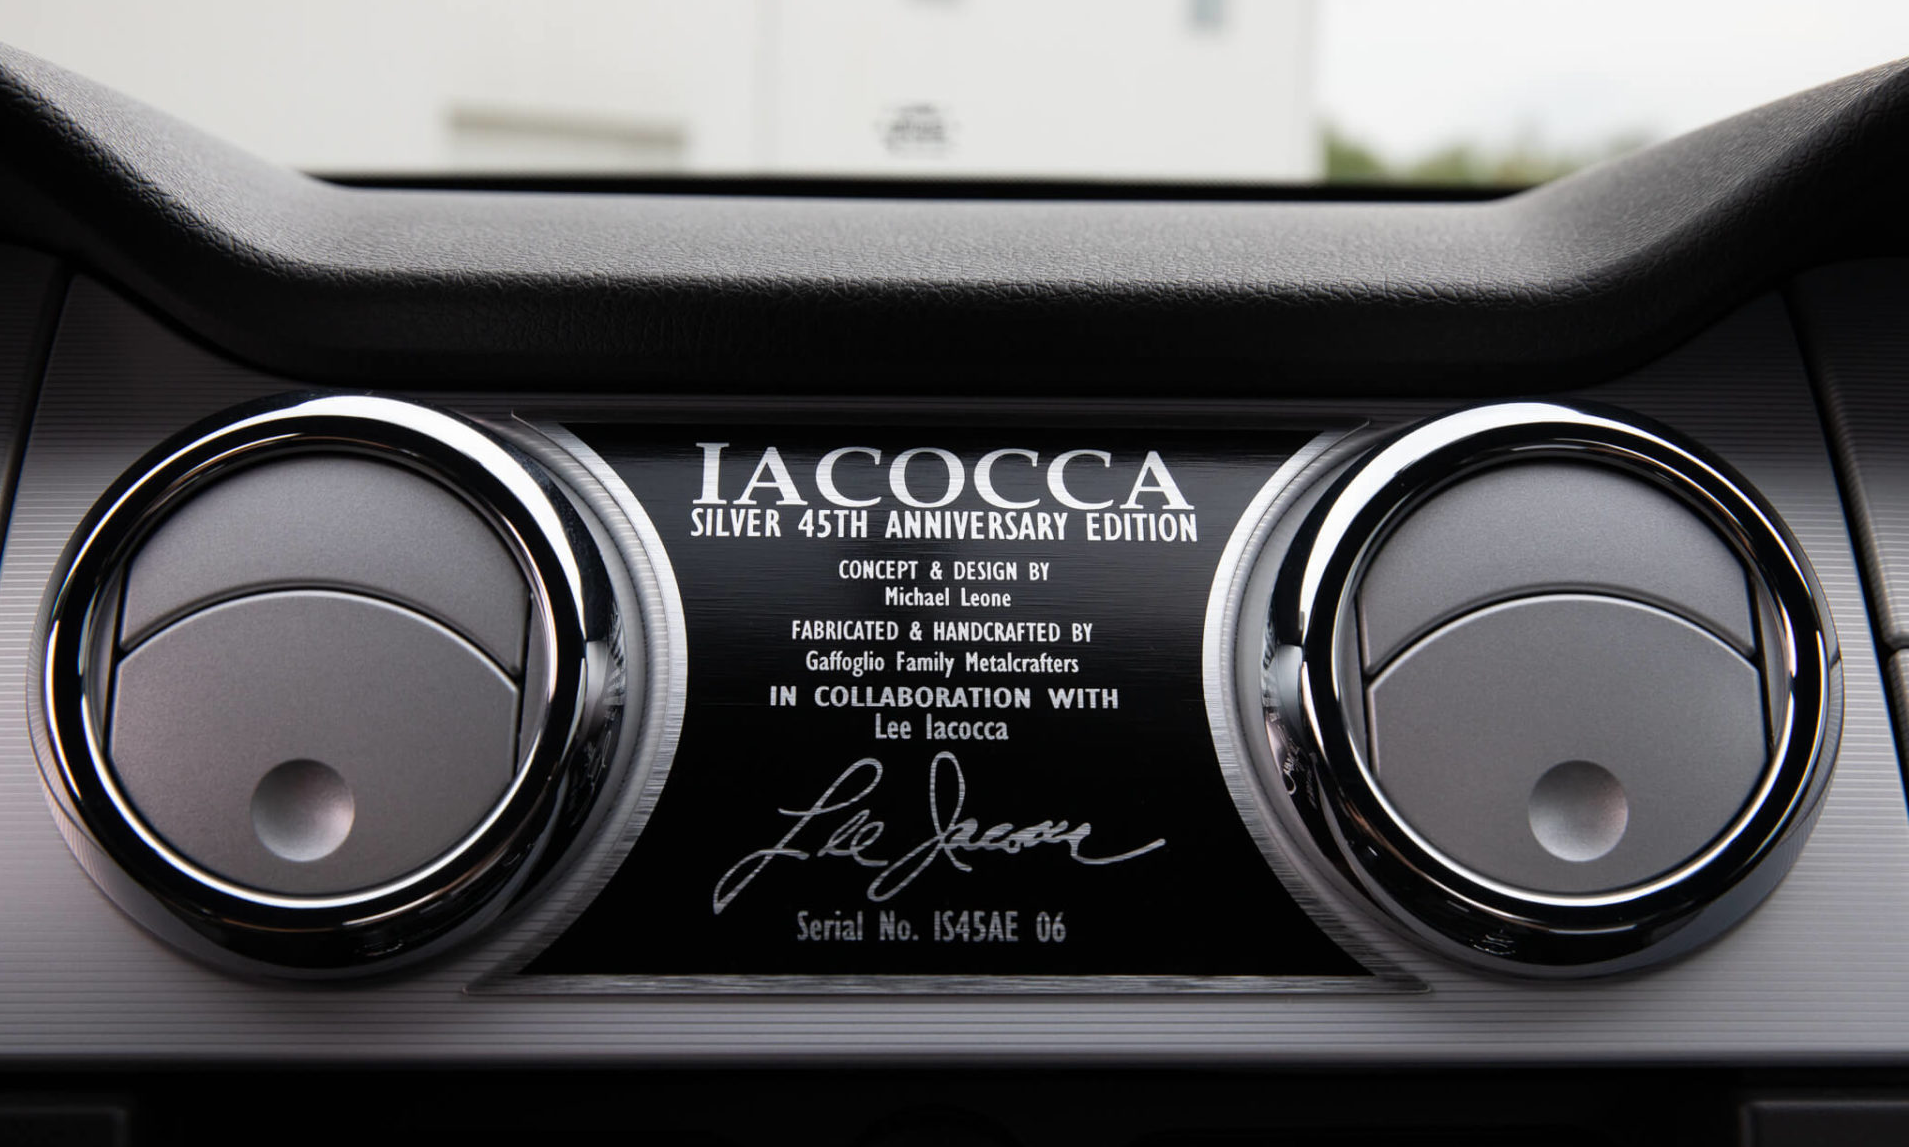 Interior of the Lee Iacocca Mustang Edition